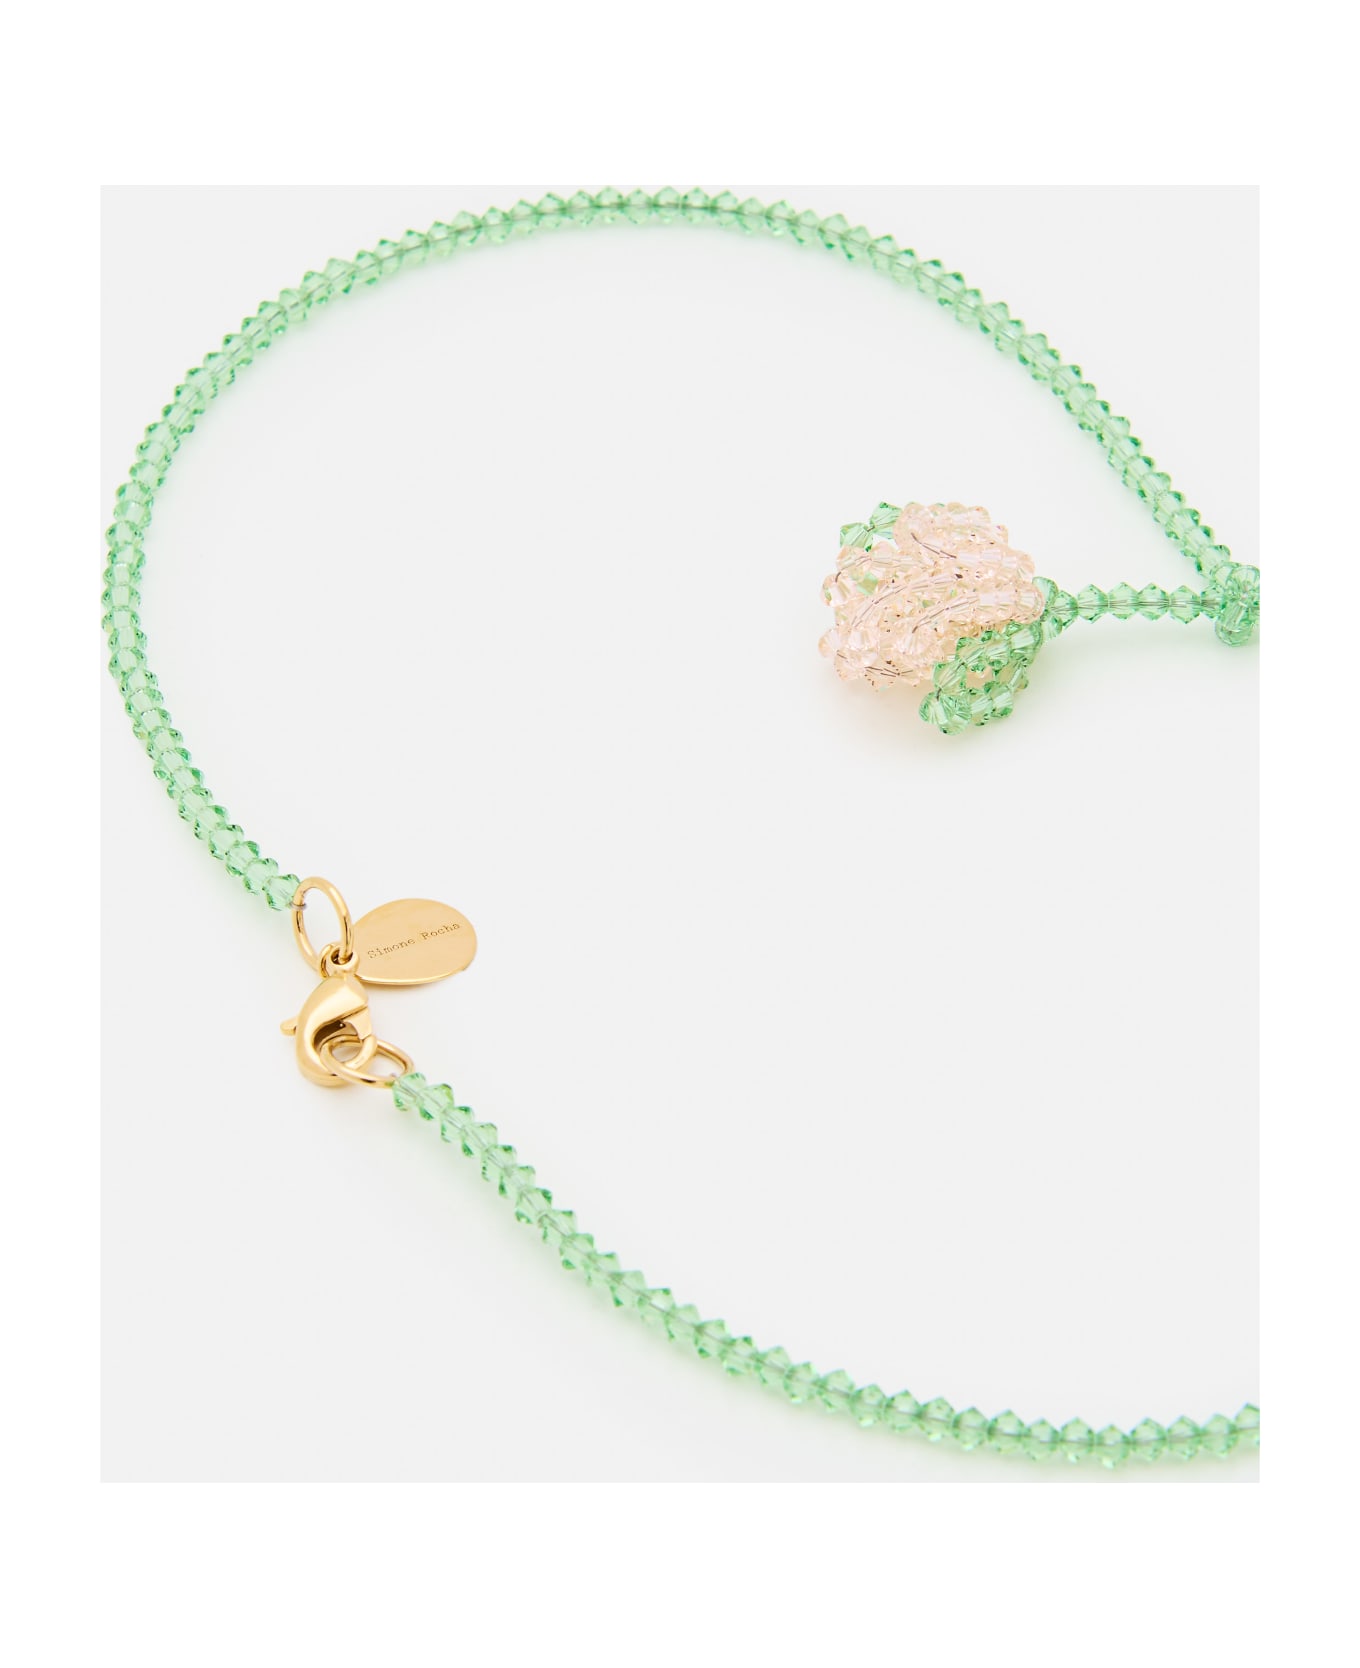 Simone Rocha Cluster Crystal Flower Necklace - Pink ネックレス